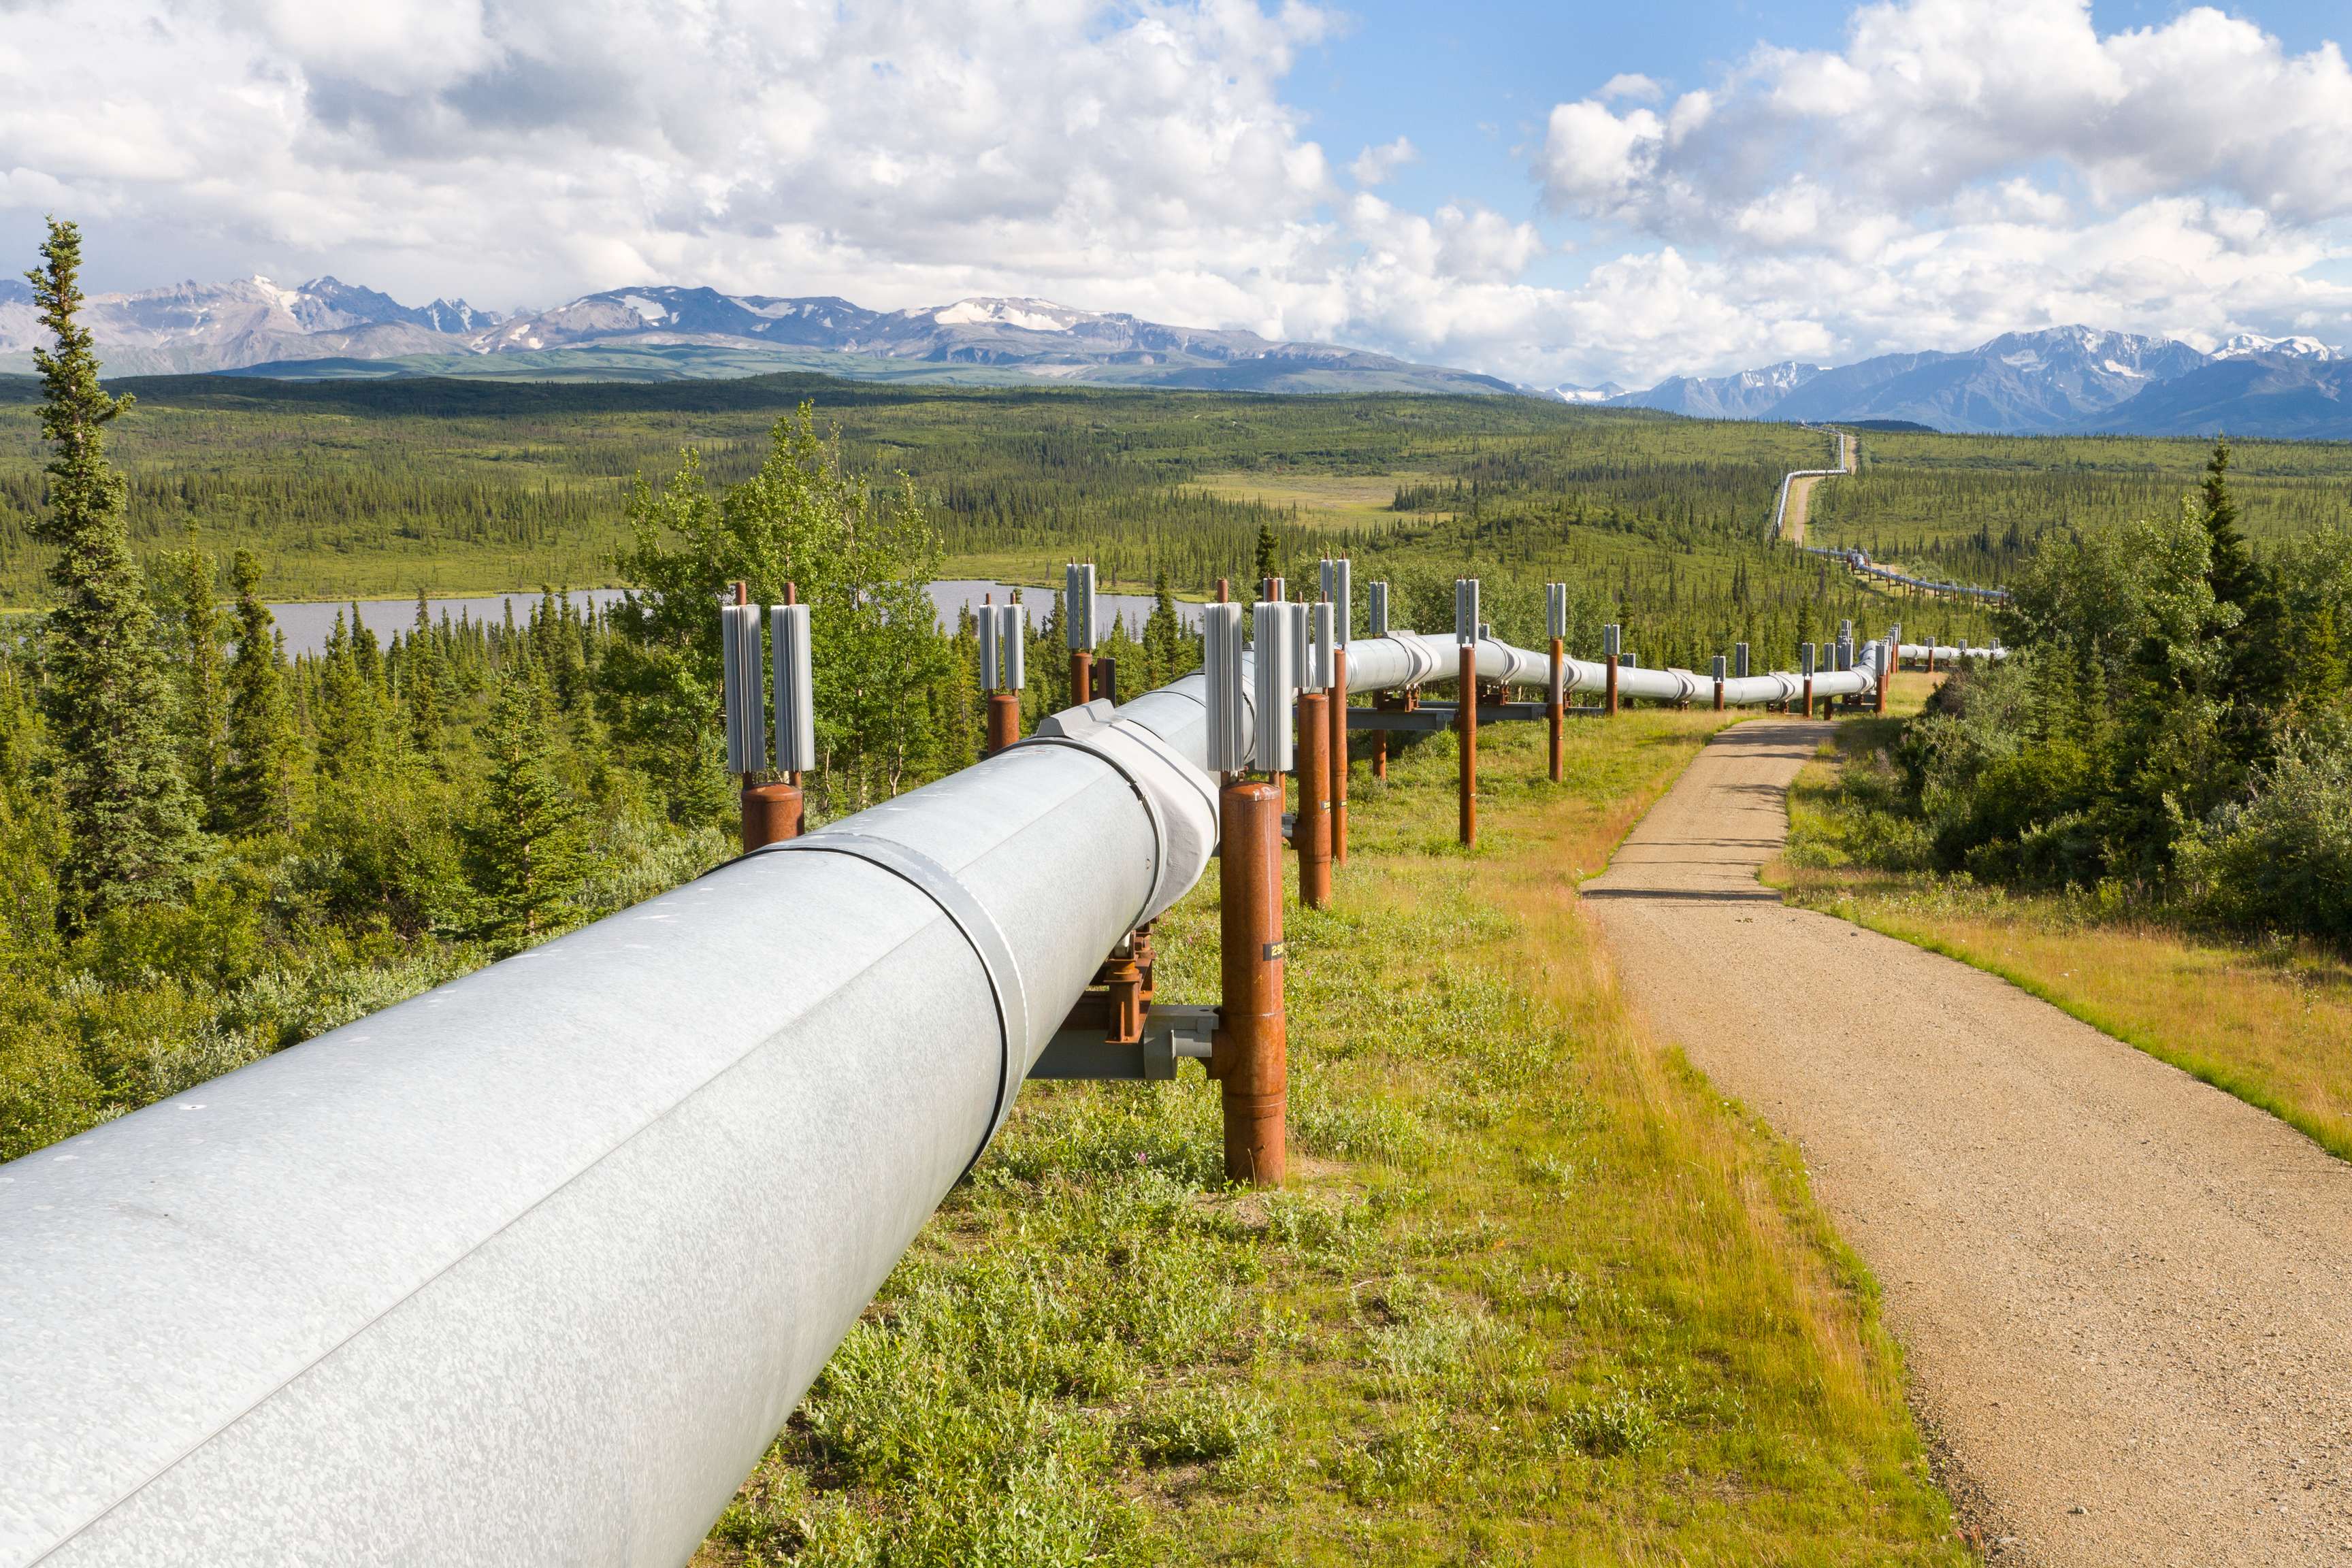 Pipeline running through green landscape with trees, mountains in background.